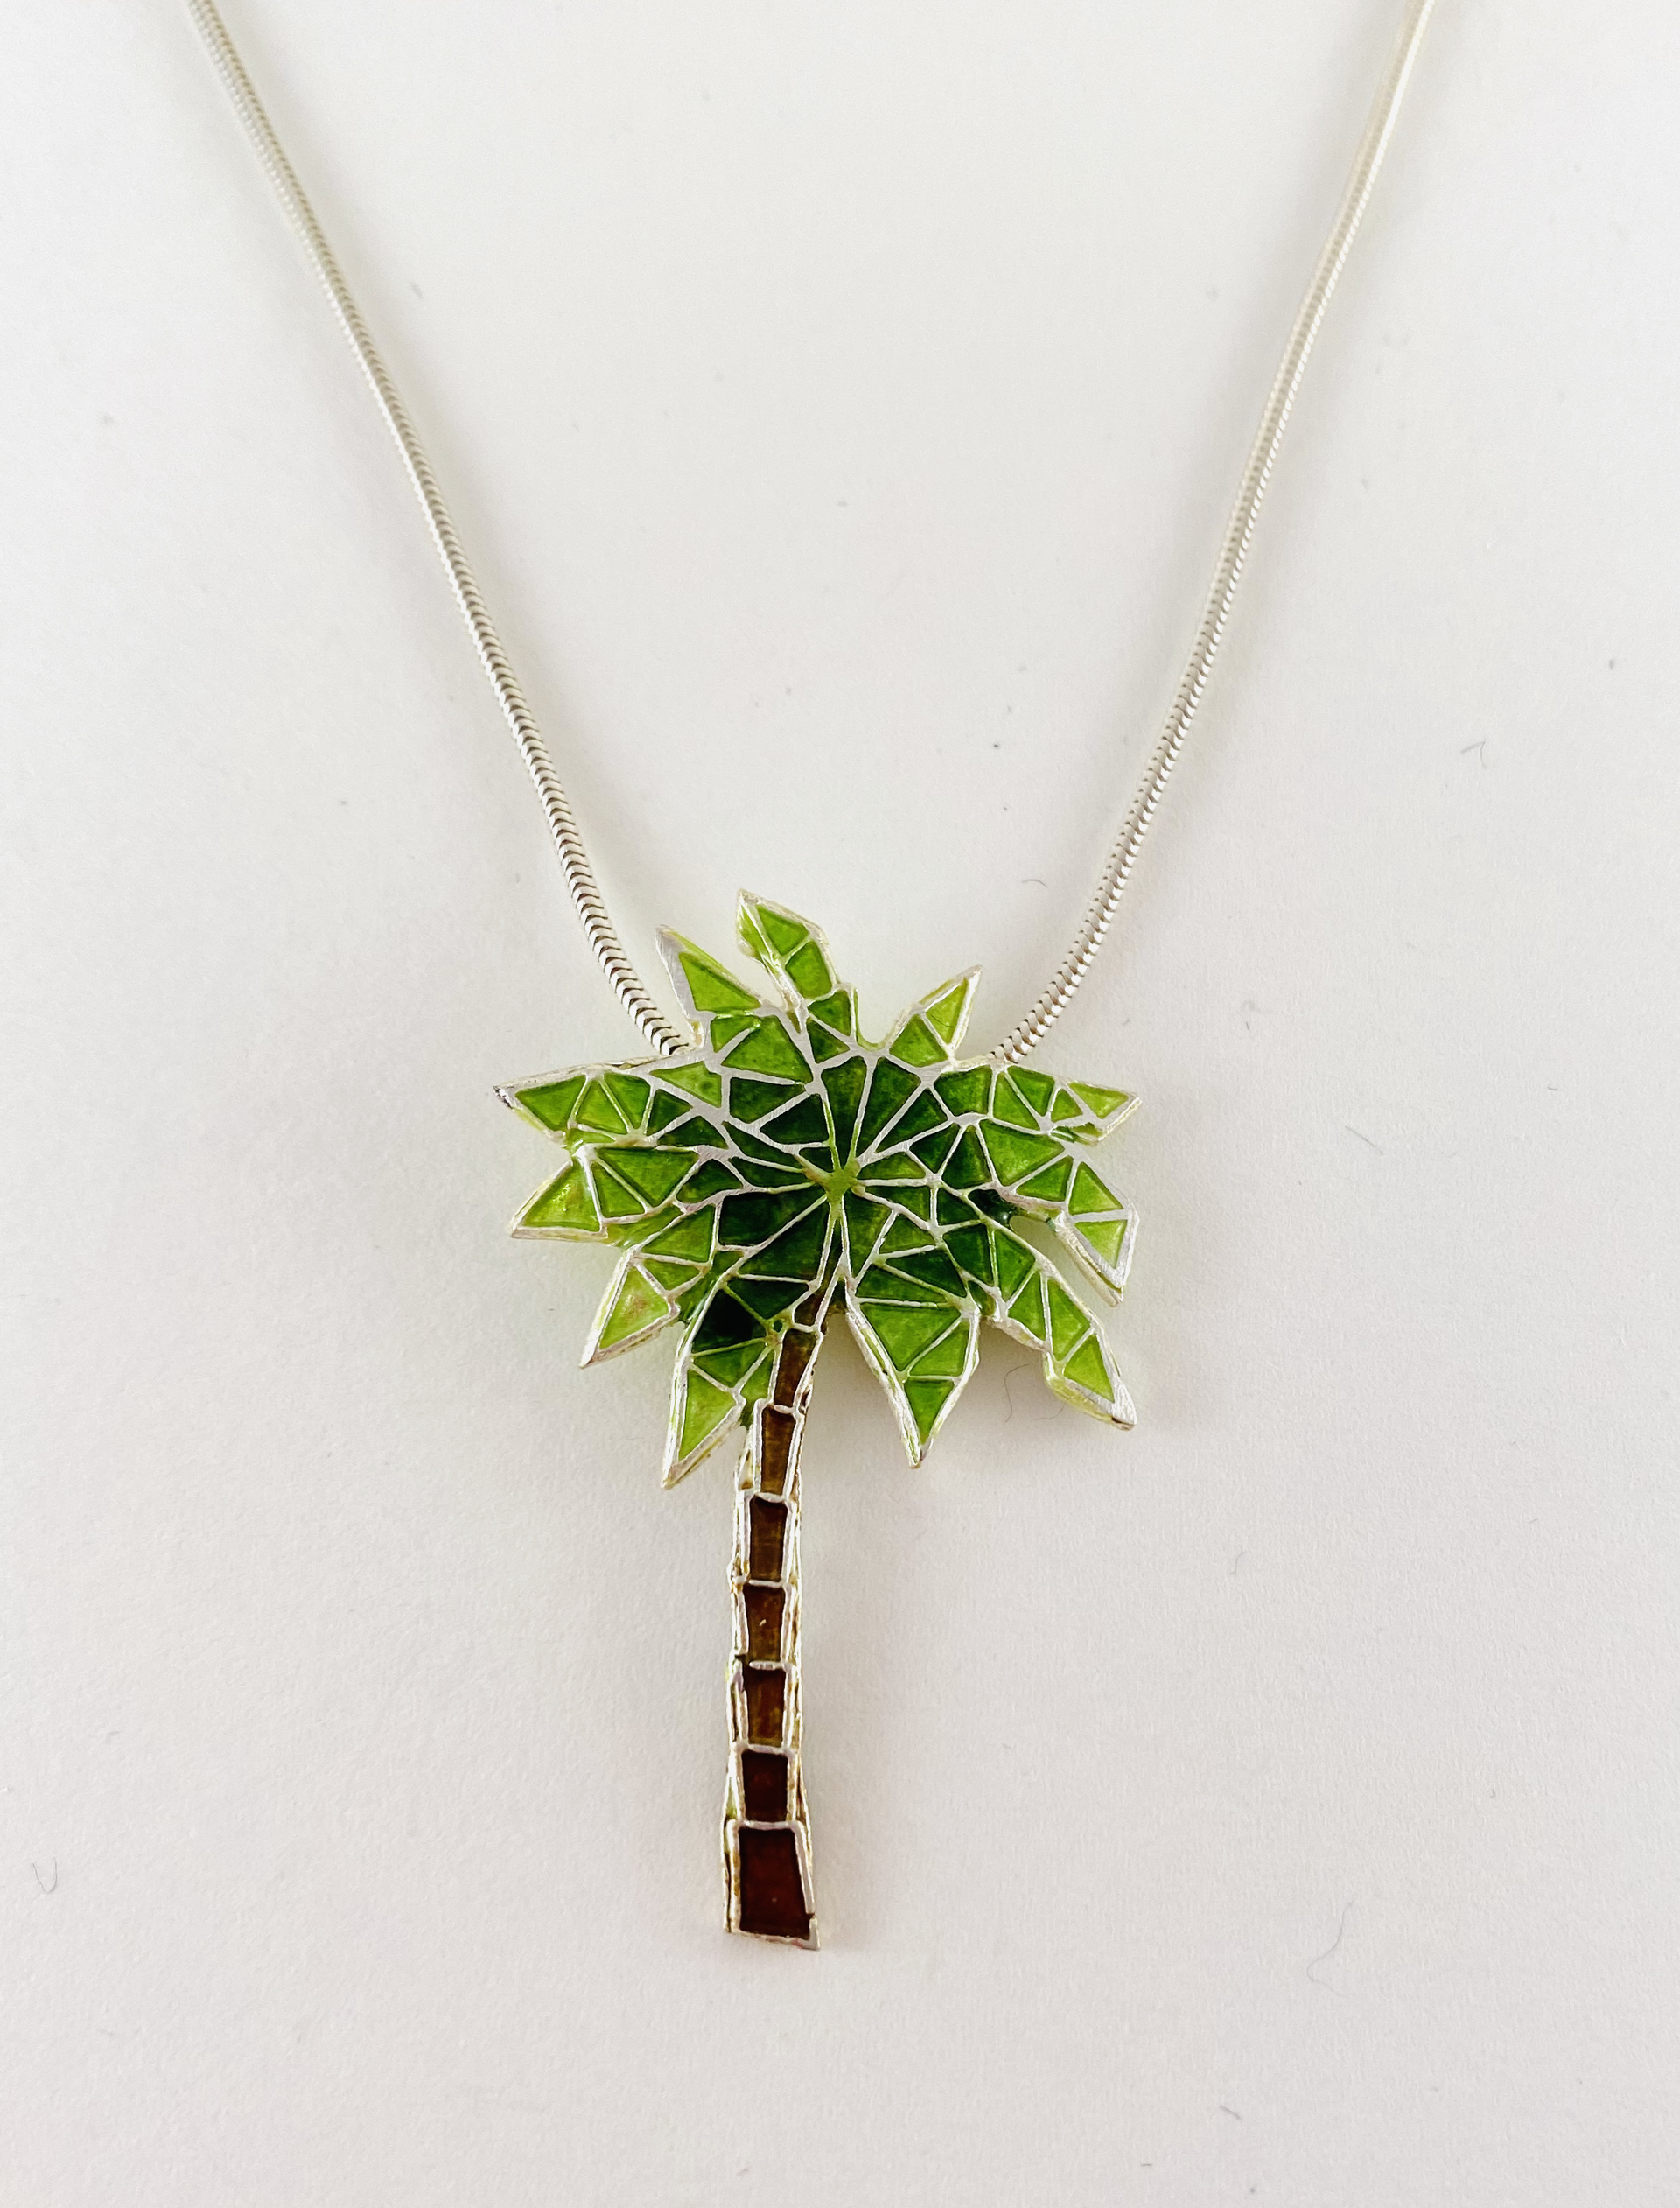 Champleve Palm Tree Pendant, 18" Silver Chain Necklace by Karen Hakim